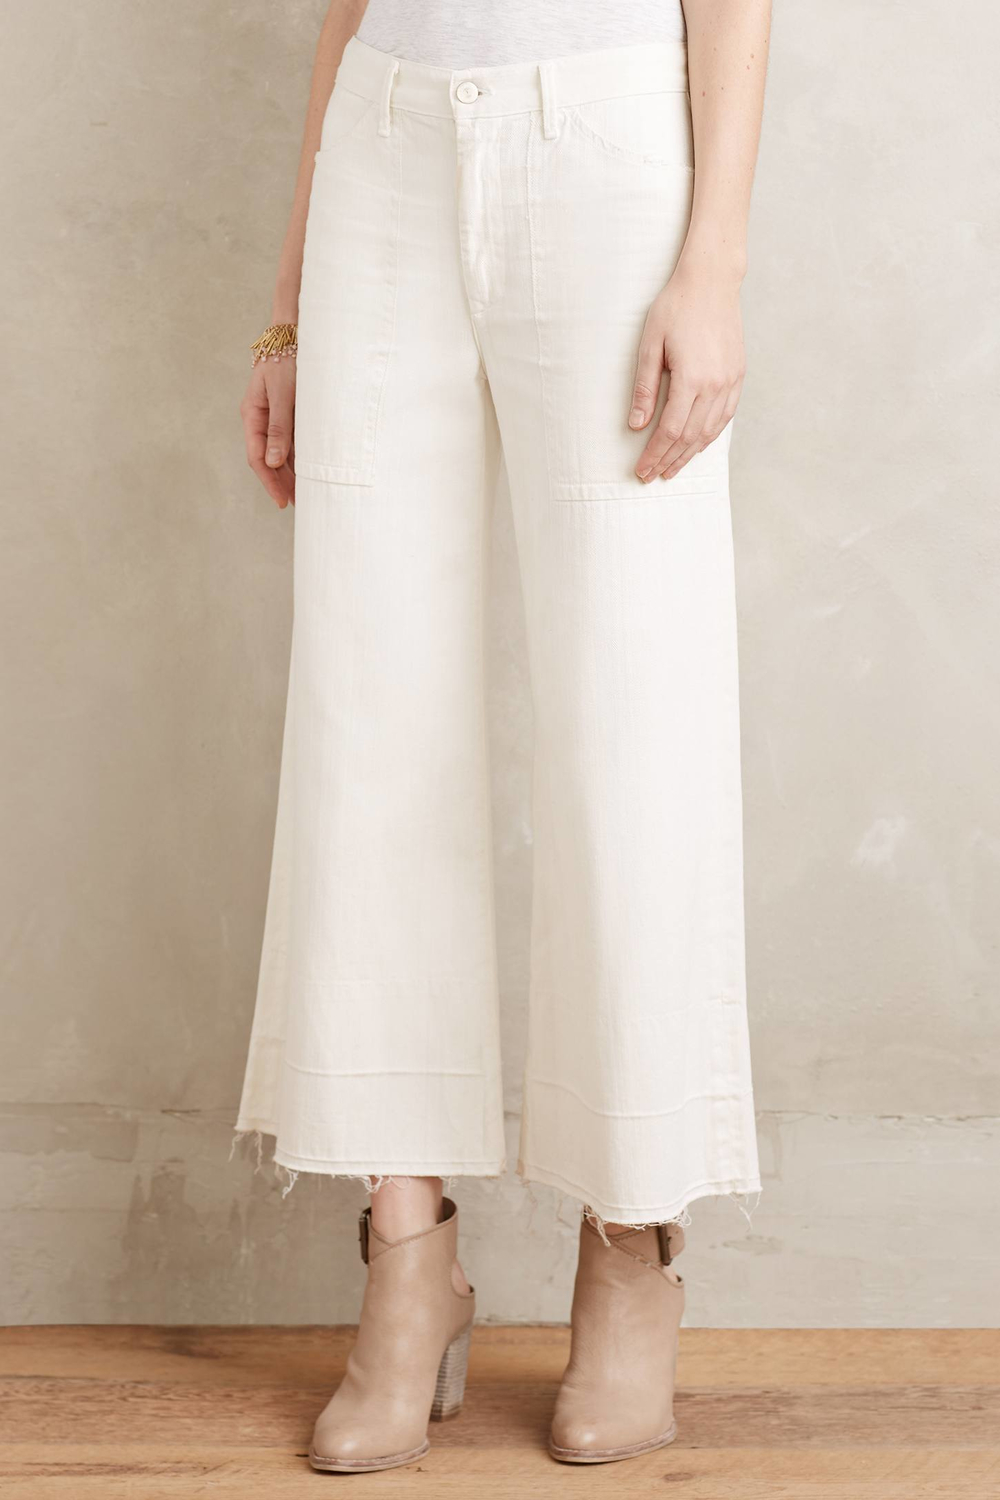 citizens-of-humanity-white-melanie-cropped-wide-legs-product-2-062186450-normal.jpeg